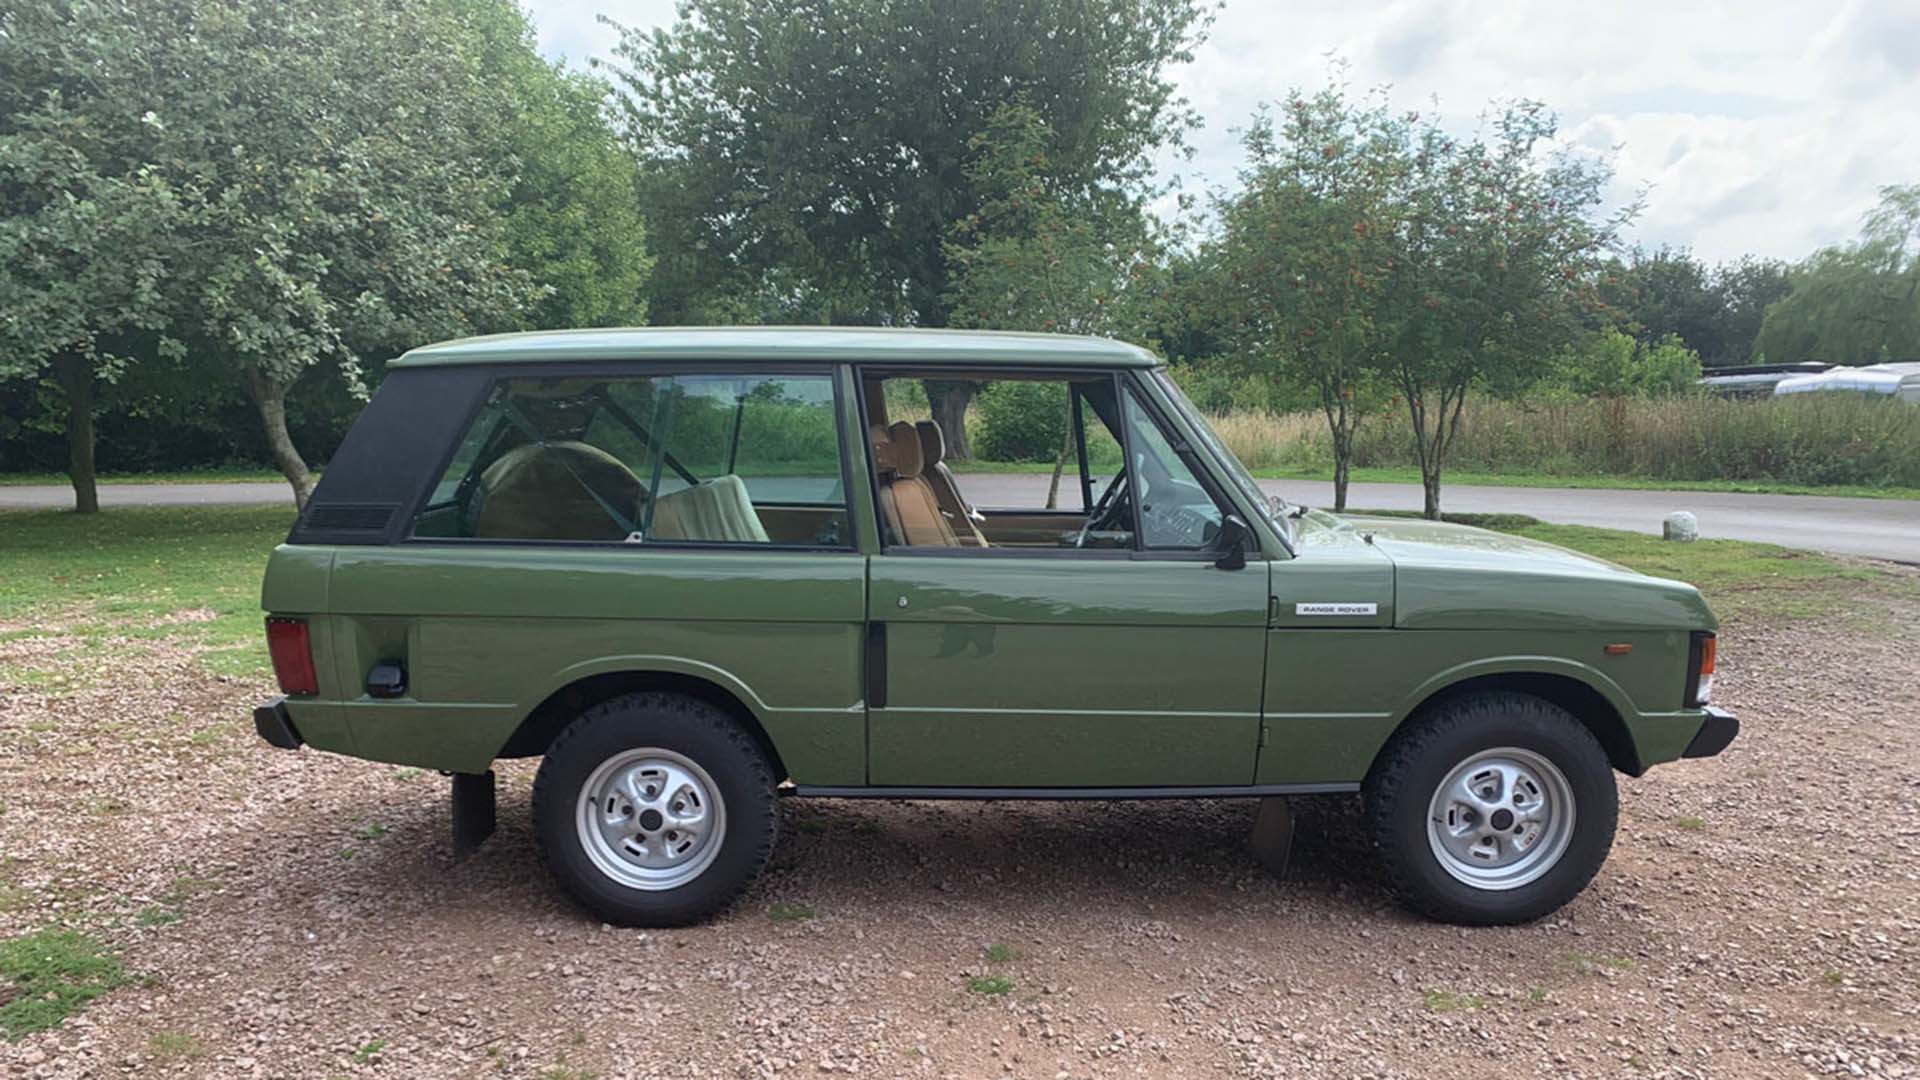 Salvage Hunters Range Rover for sale